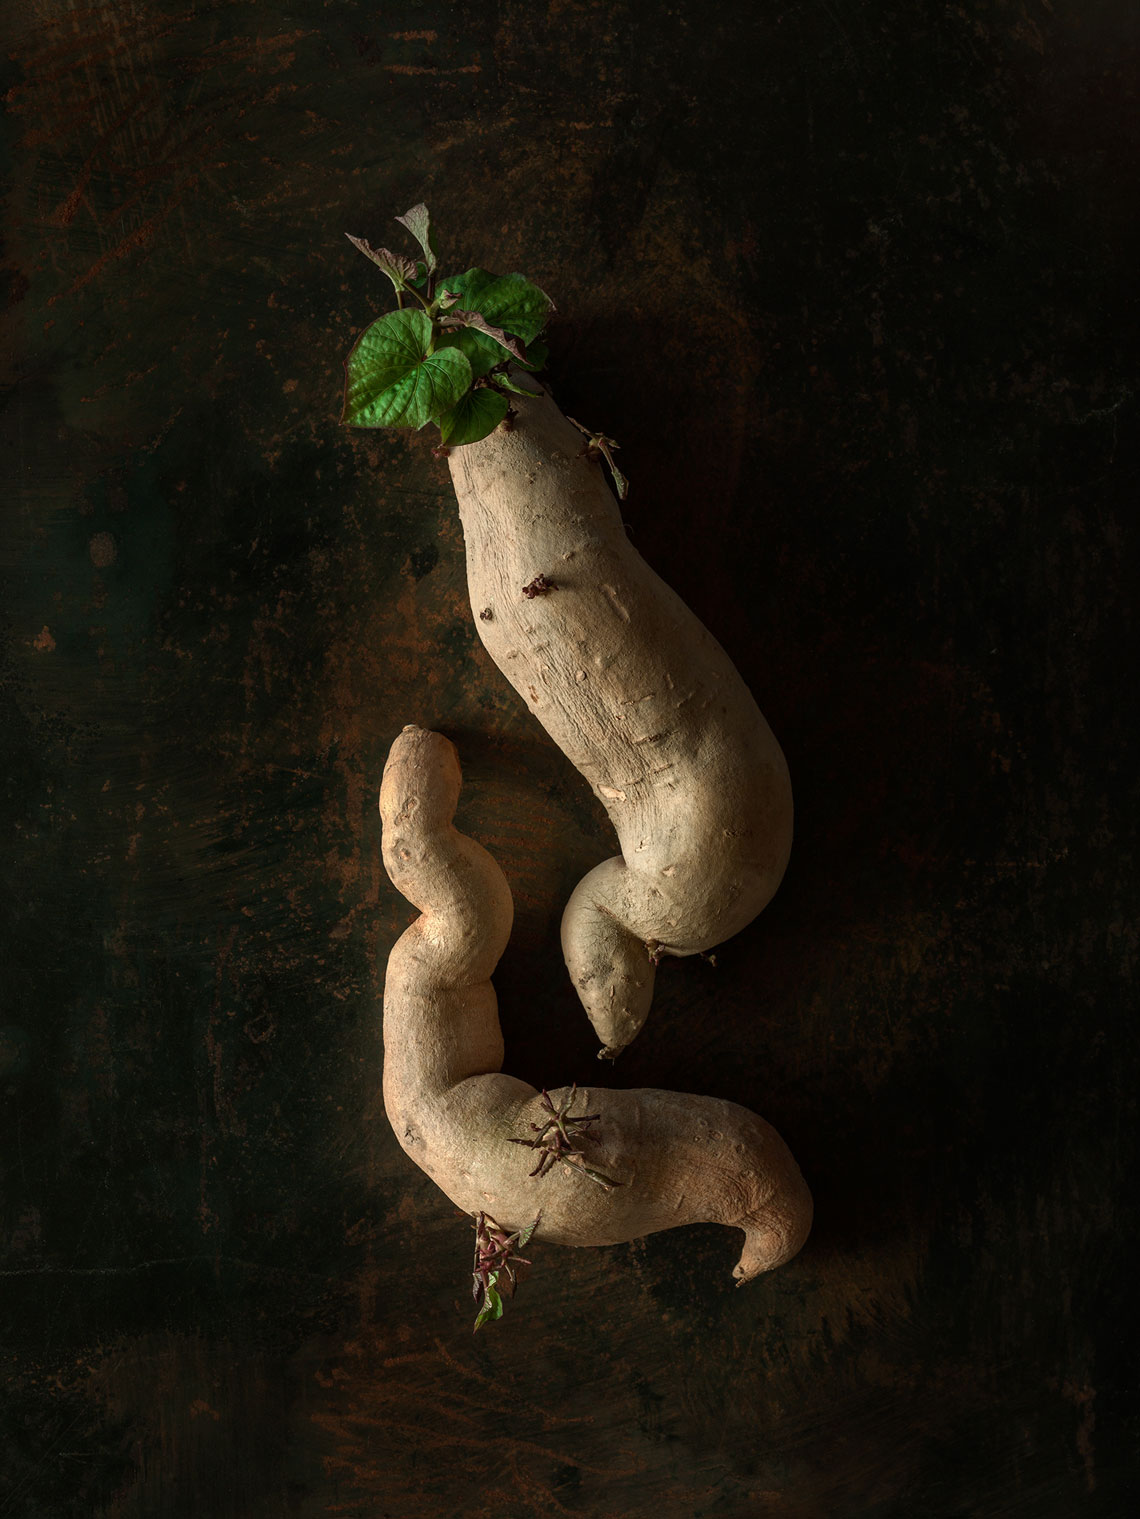 Roots_Series-4-small-potatoes-29856-as-Smart-Object-1